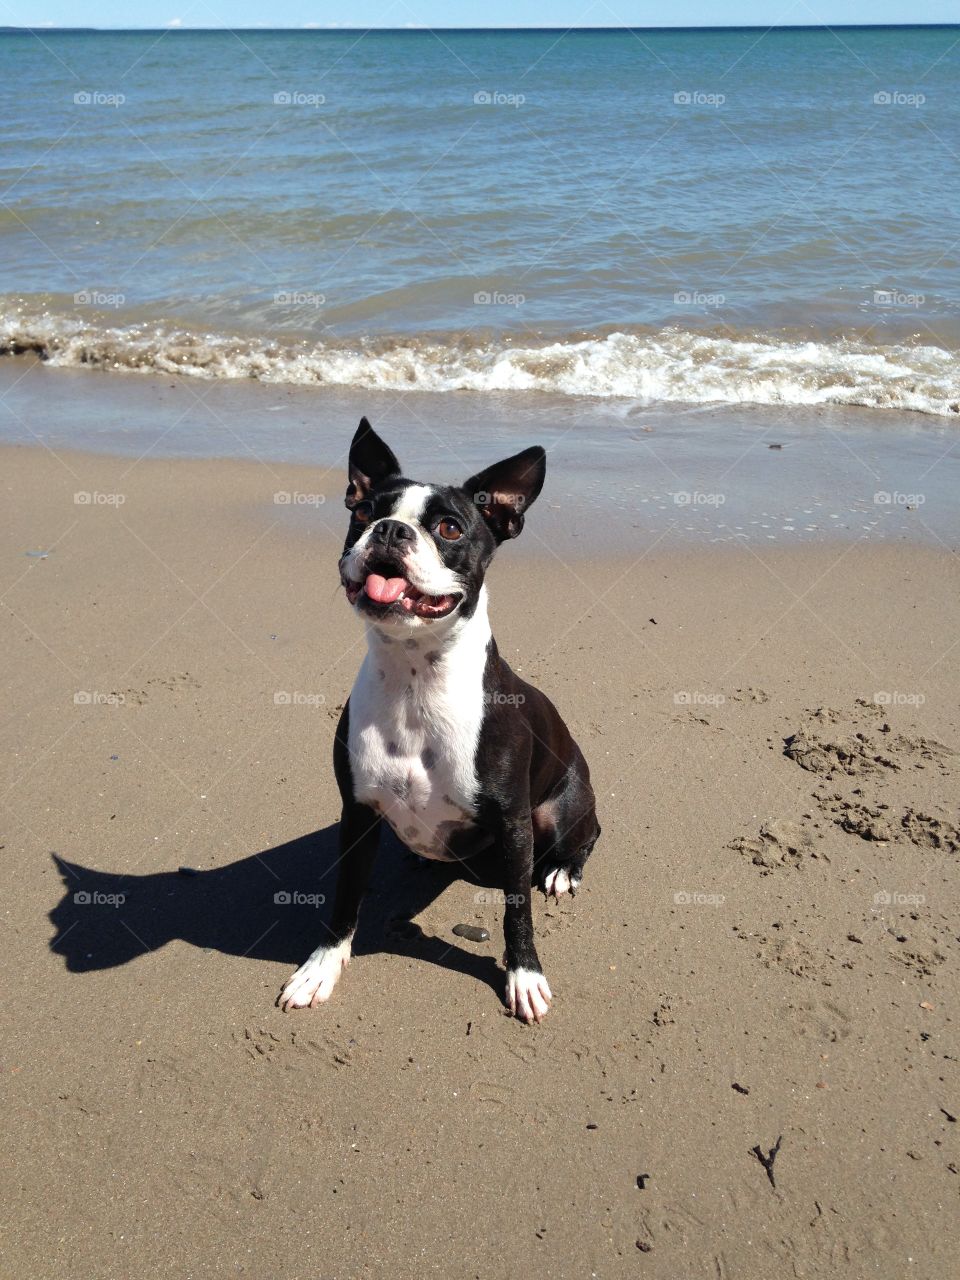 Beach day! Cutest pet in the world!